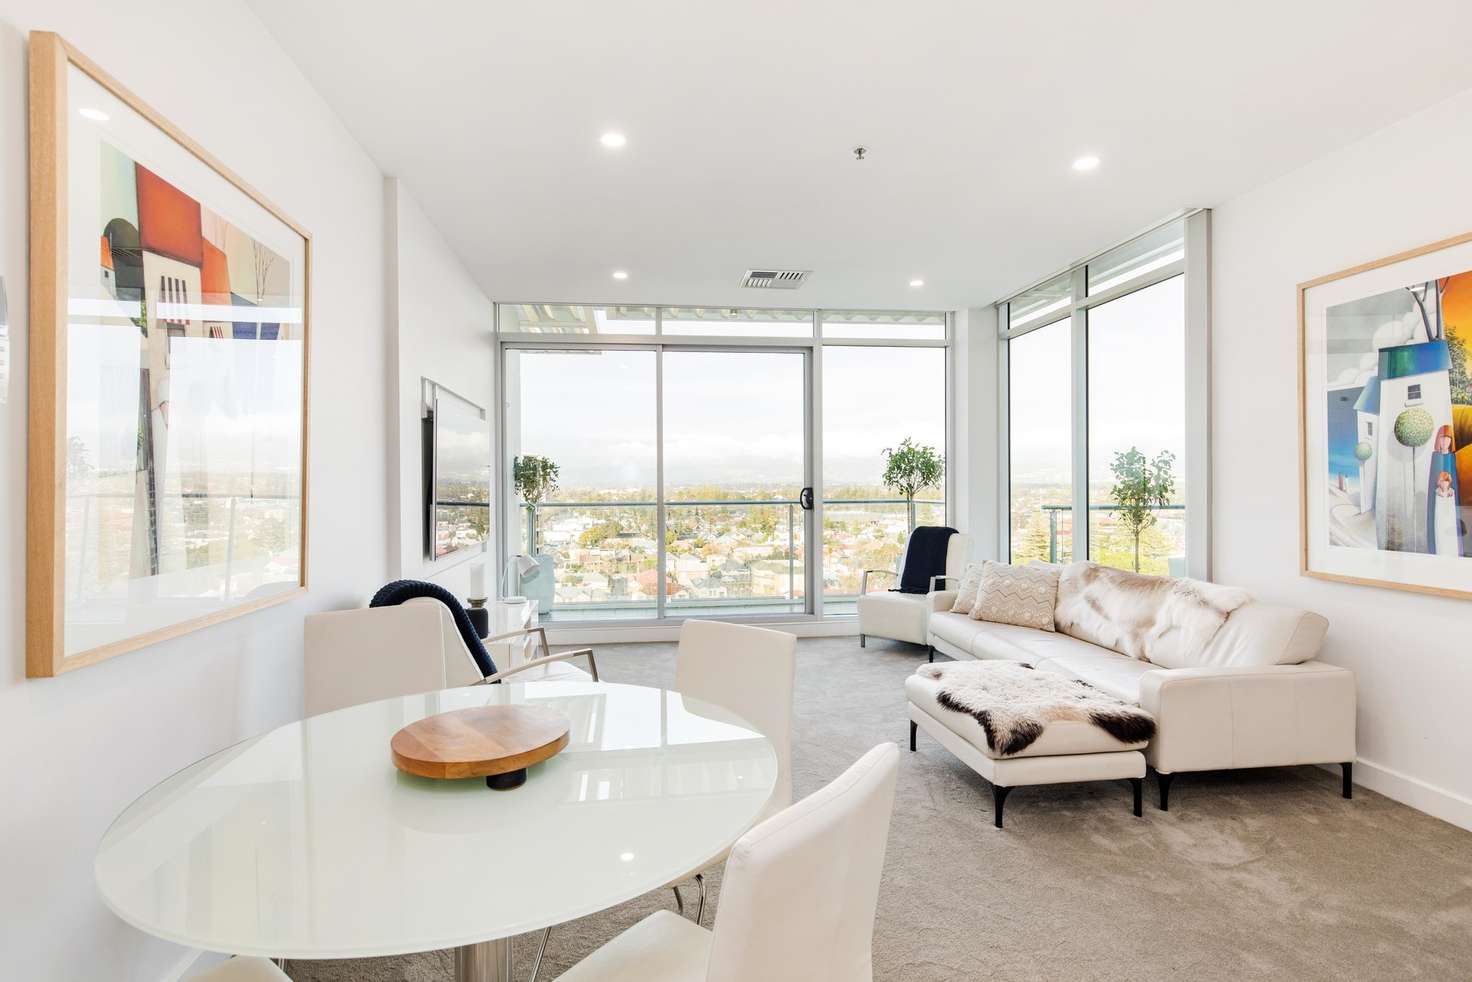 Main view of Homely apartment listing, 1211/27 Colley Terrace, Glenelg SA 5045